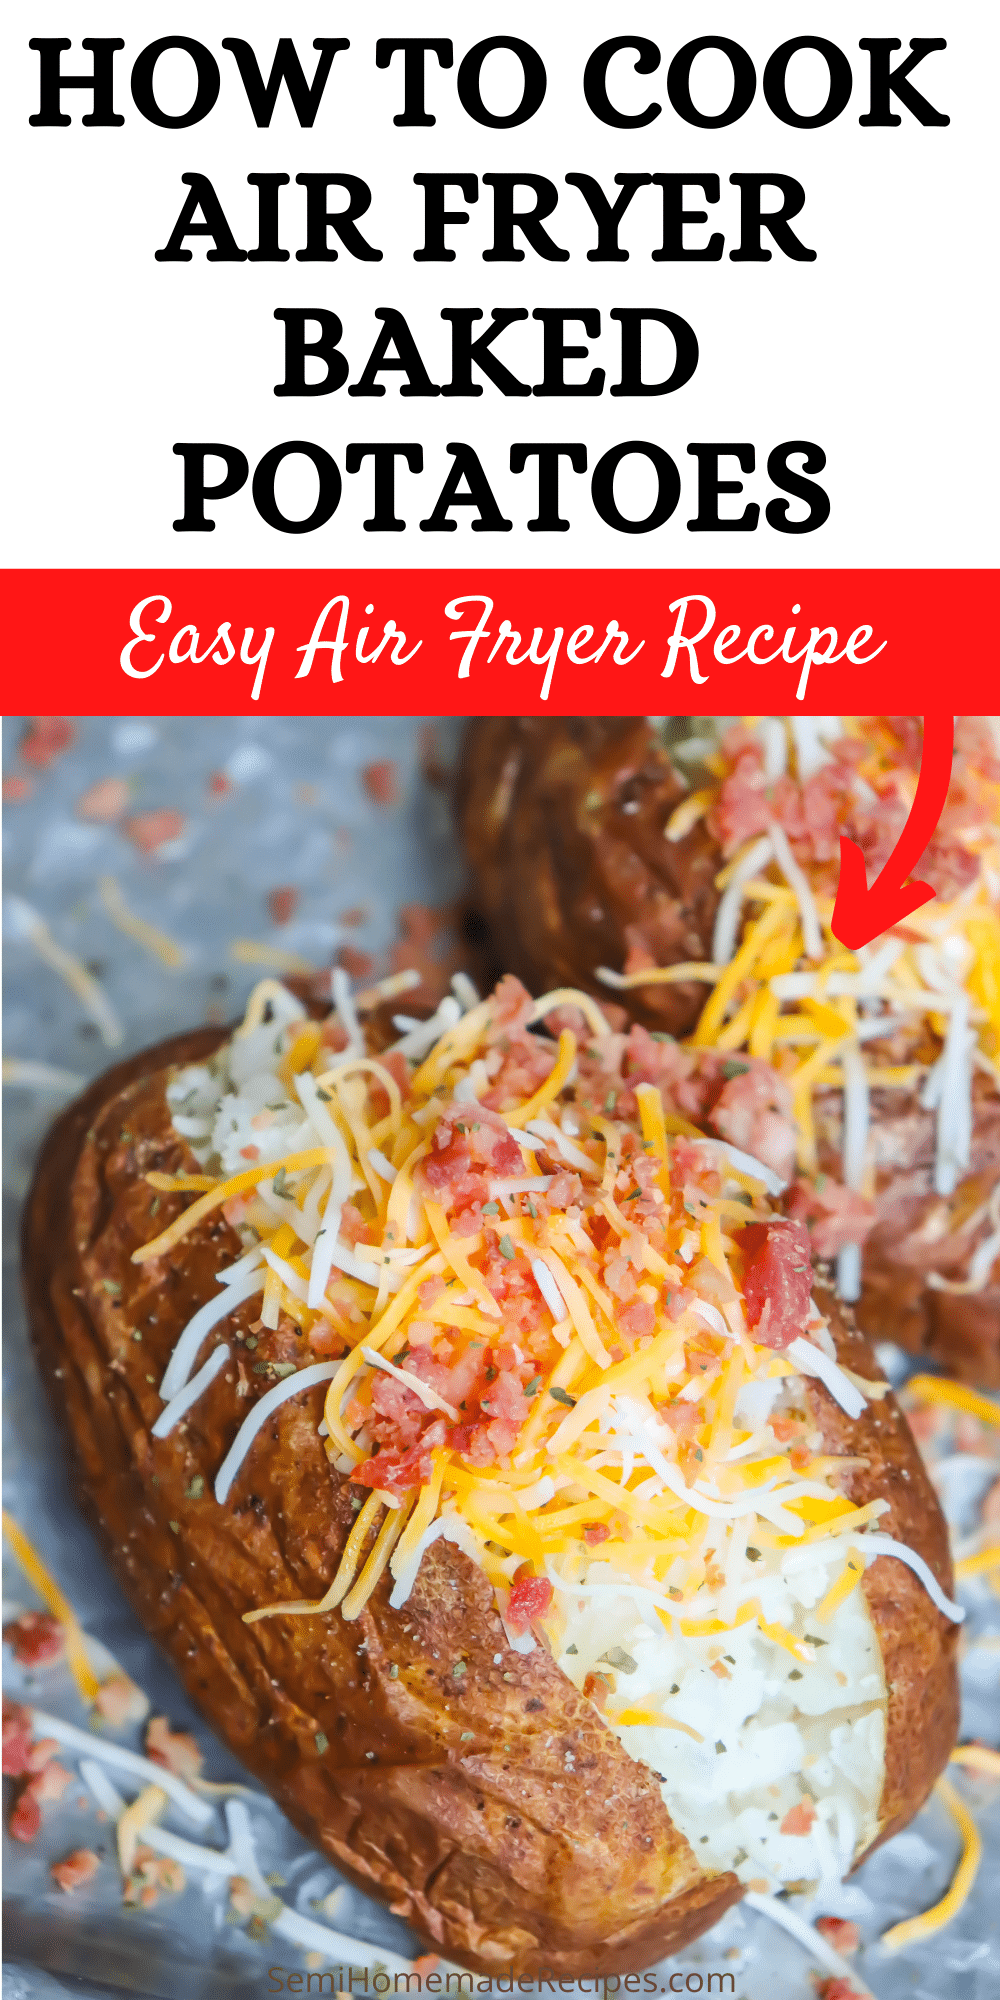  You're going to love these air fryer baked potatoes! The potato skins come out crisp but you still get that perfect fluffy baked potato center! Great with all of your favorite baked potato toppings like: butter, cheese, bacon or sour cream!  via @bigbearswife